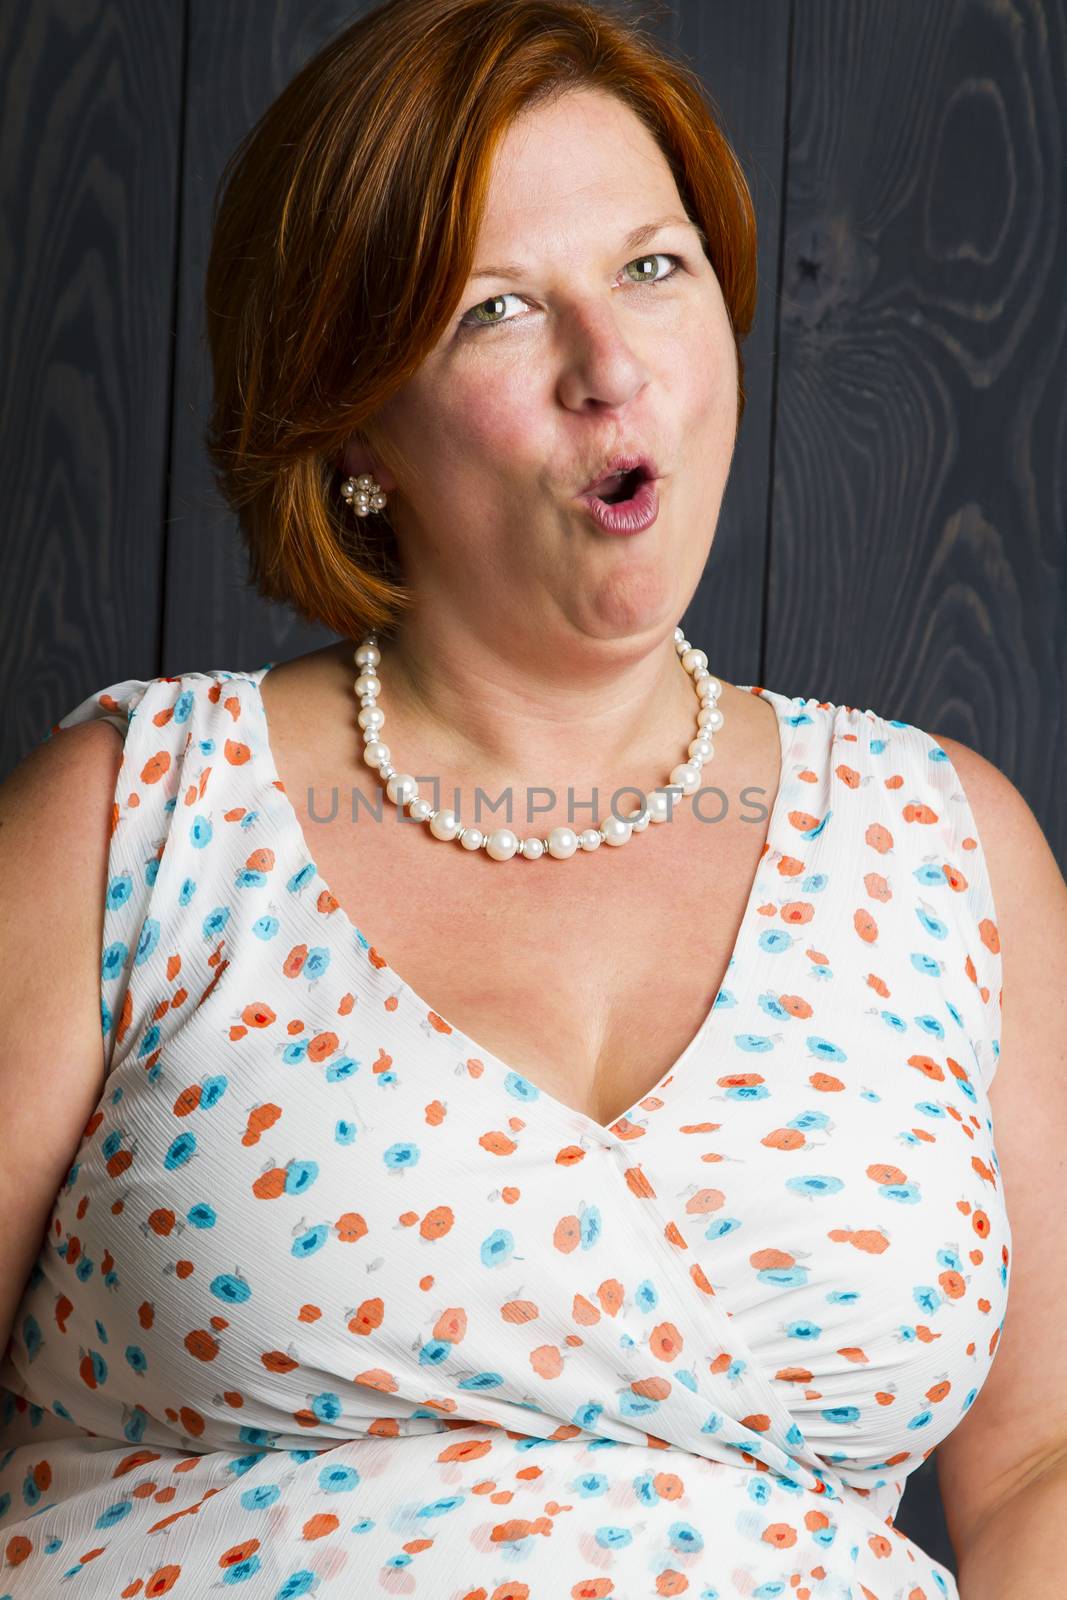 forty something woman wearing a sundress in front of a blue stain background, doing a surprise "O' face